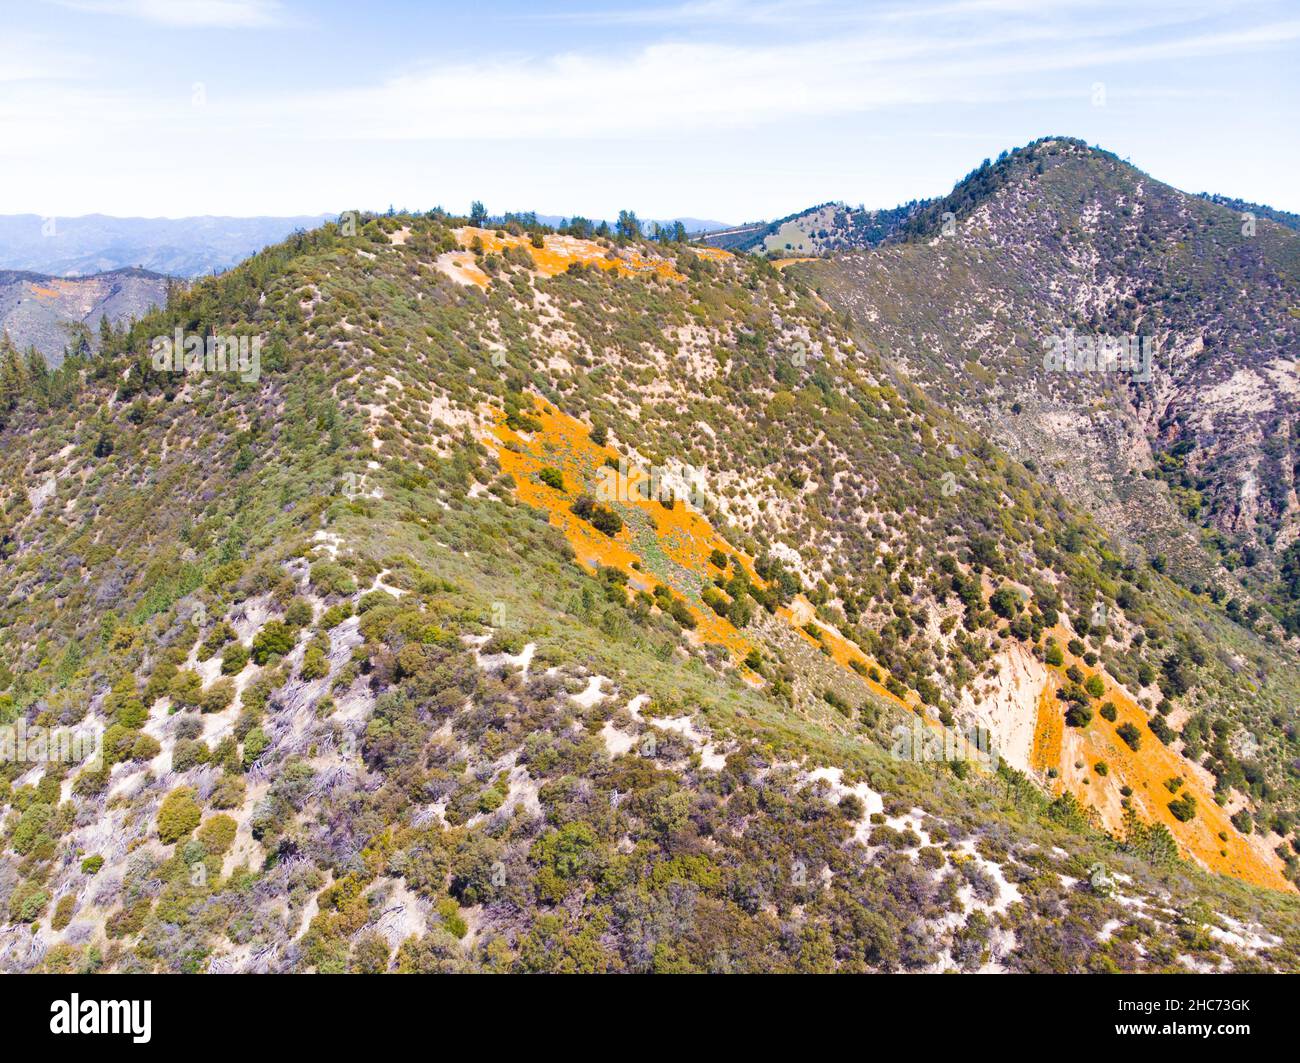 A wonderful bloomy day in the Los Padres National Forest. Stock Photo